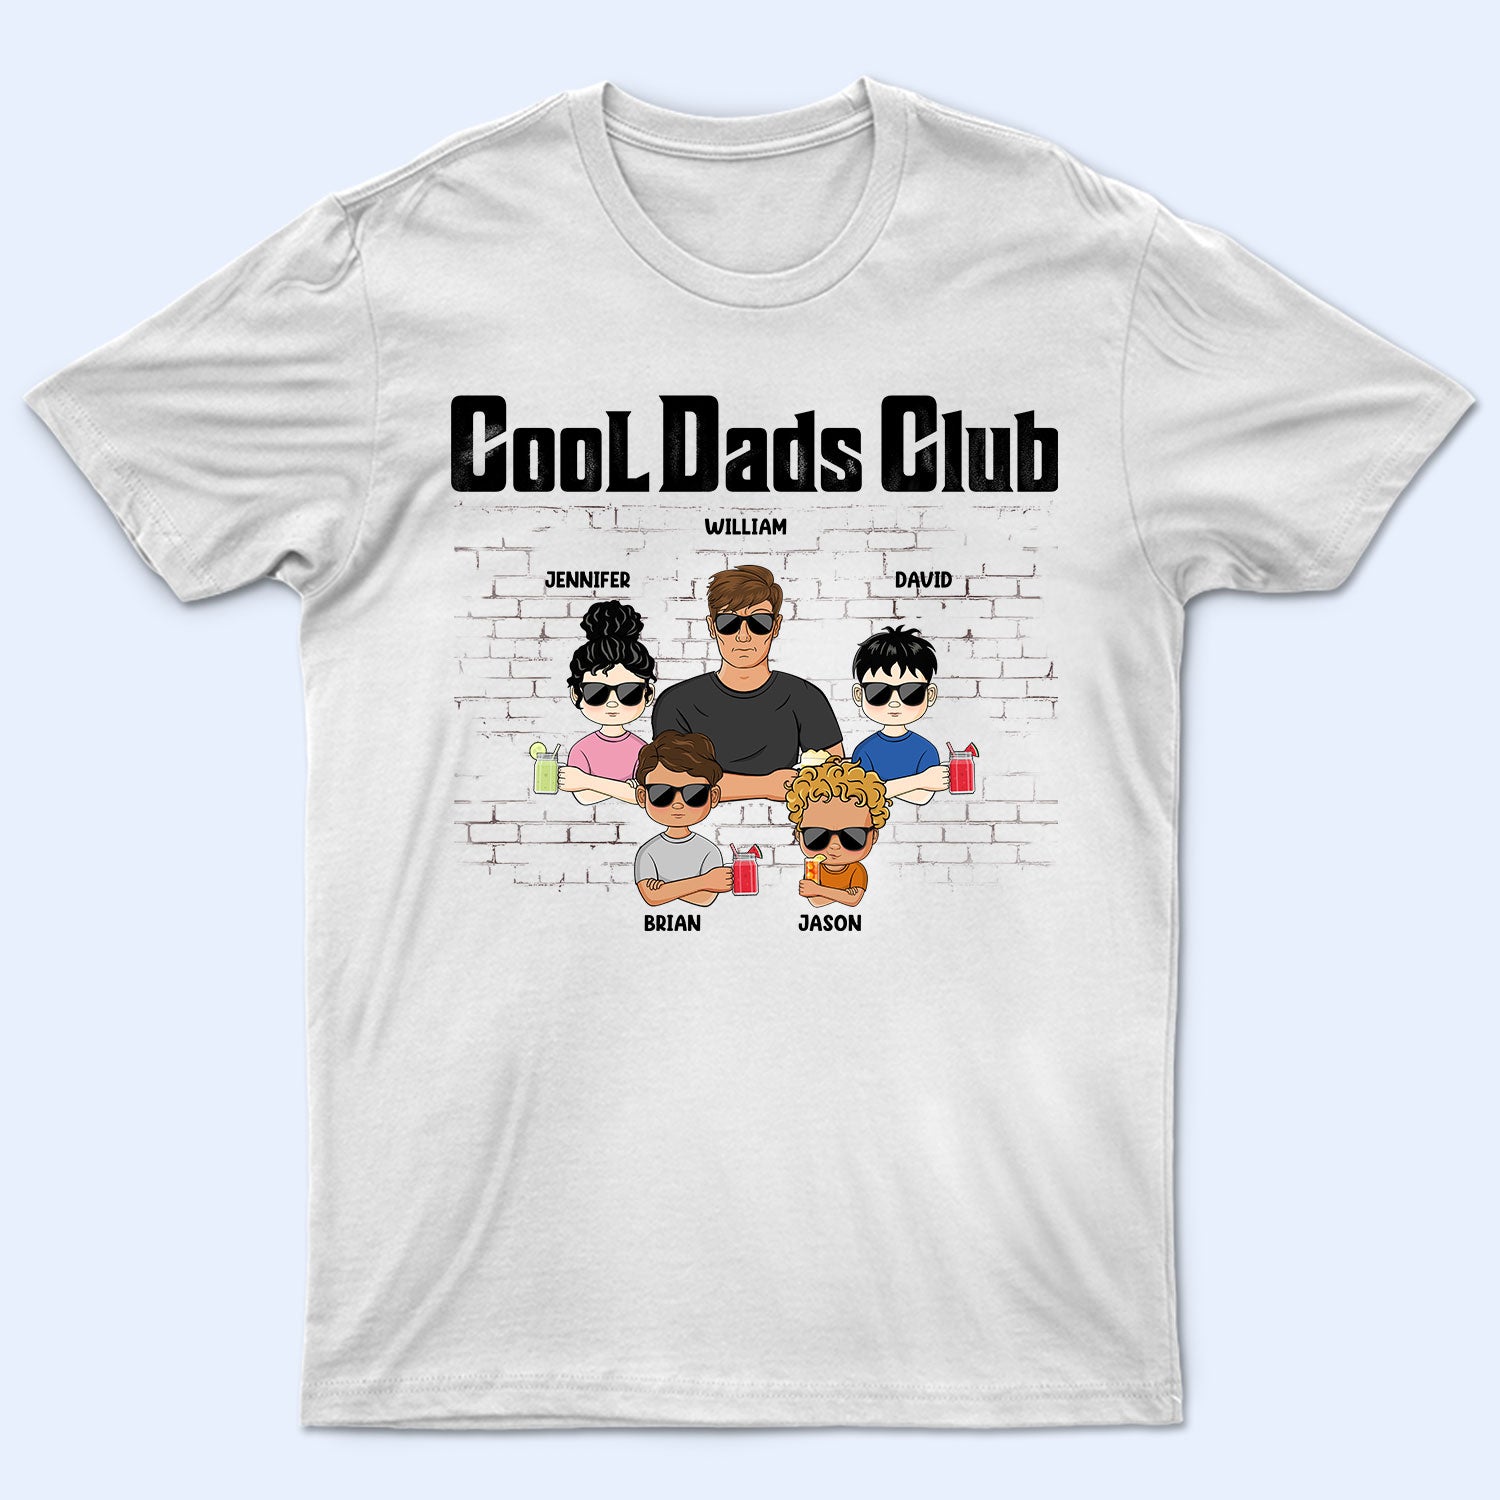 Cool Dads Club - Gift For Dad, Father - Personalized T Shirt